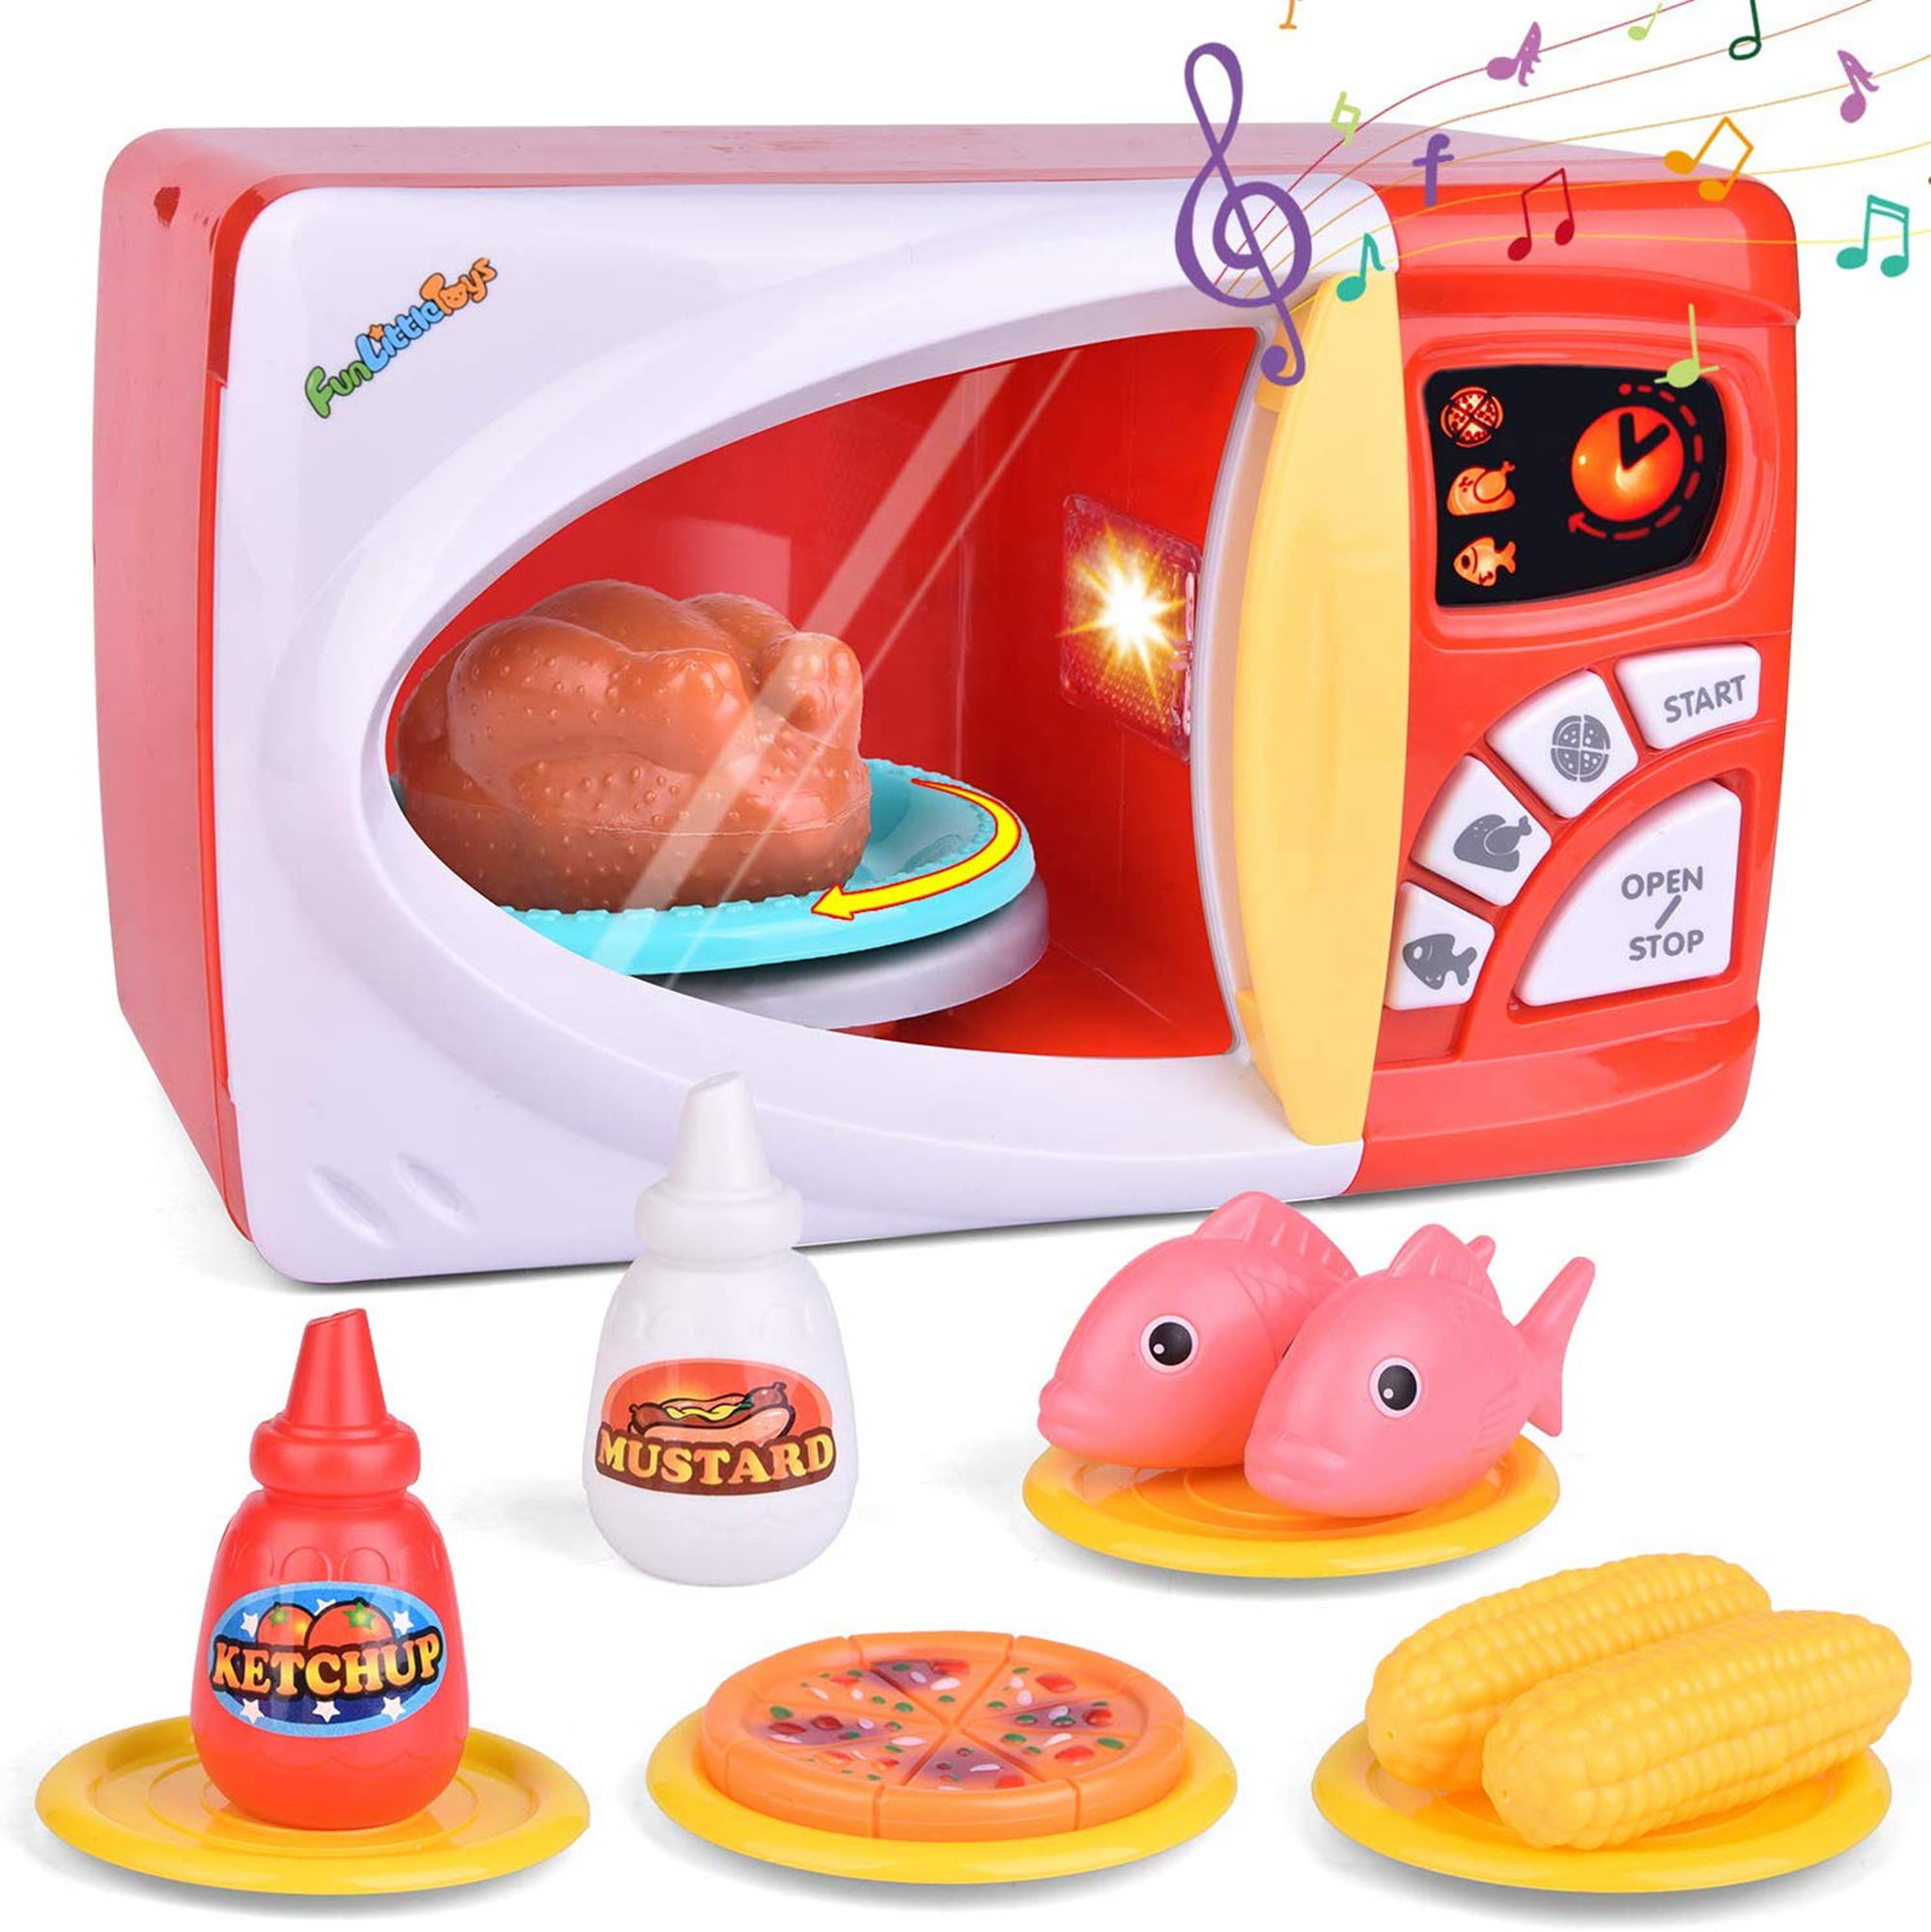 Kids Children Mini Appliance Toy with Light and Sound Blue Microwave Oven 